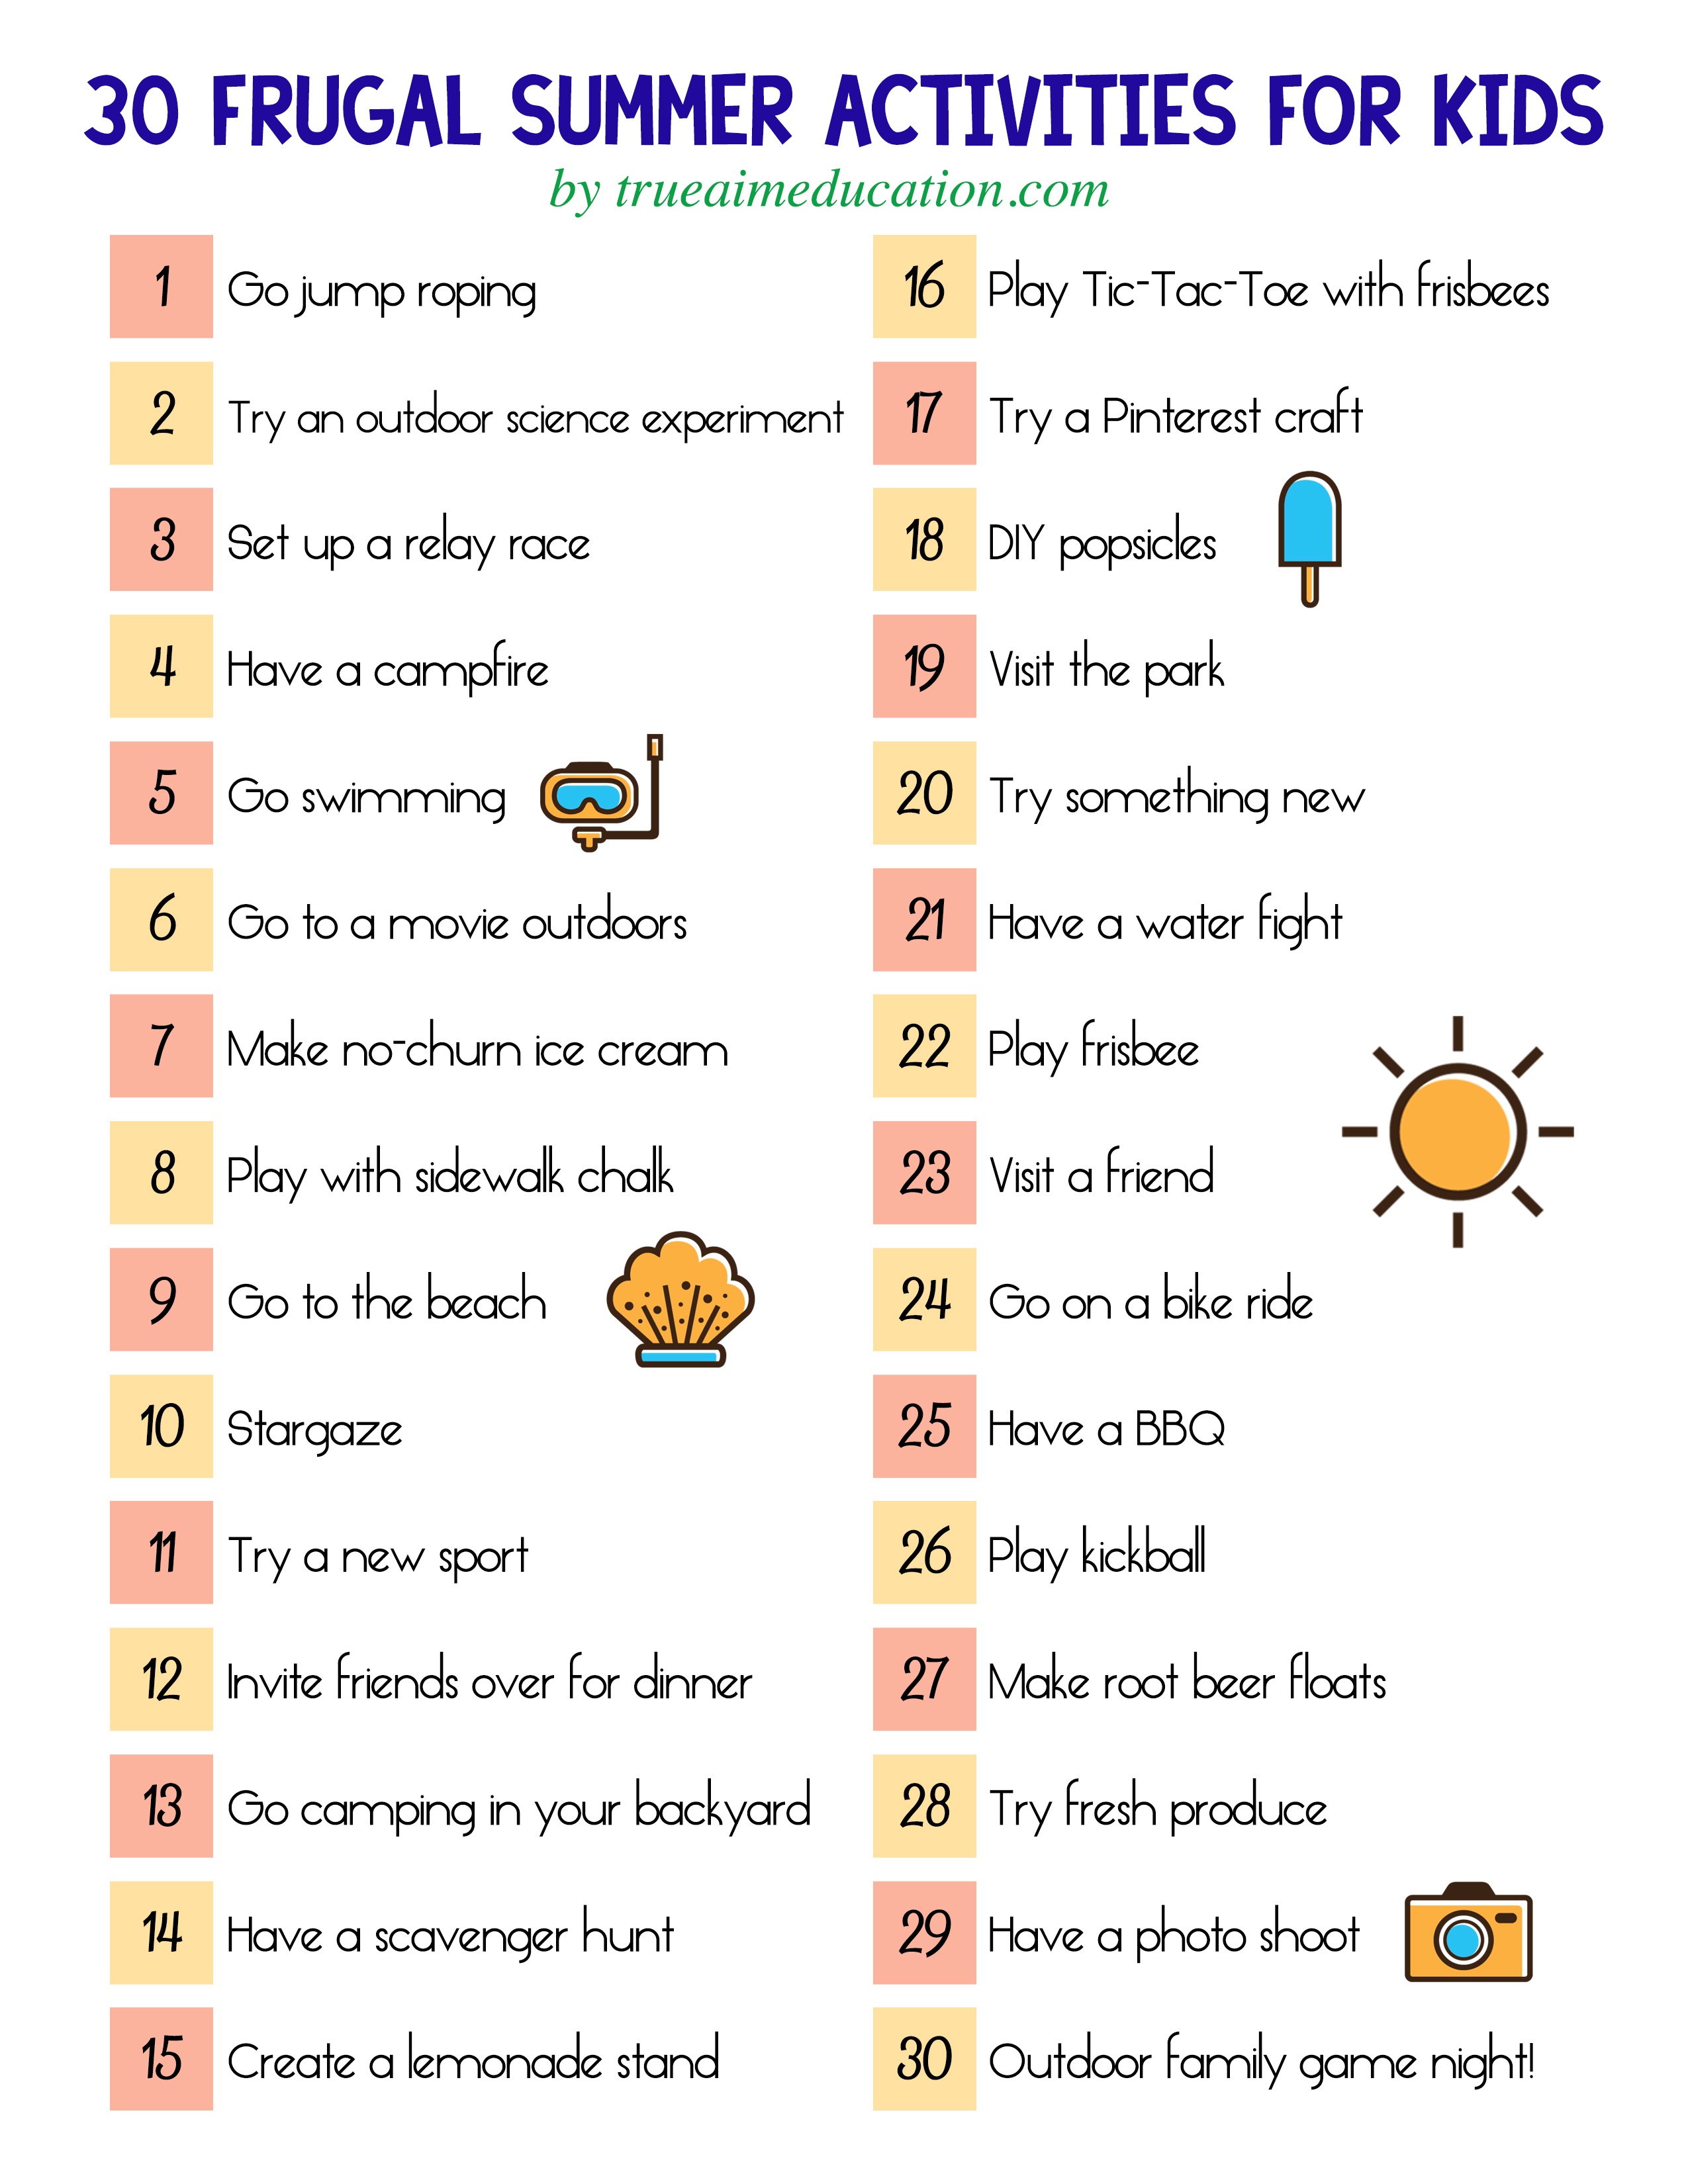 30 Frugal Summer Activities + A Free Printable - Free Printable Summer Games